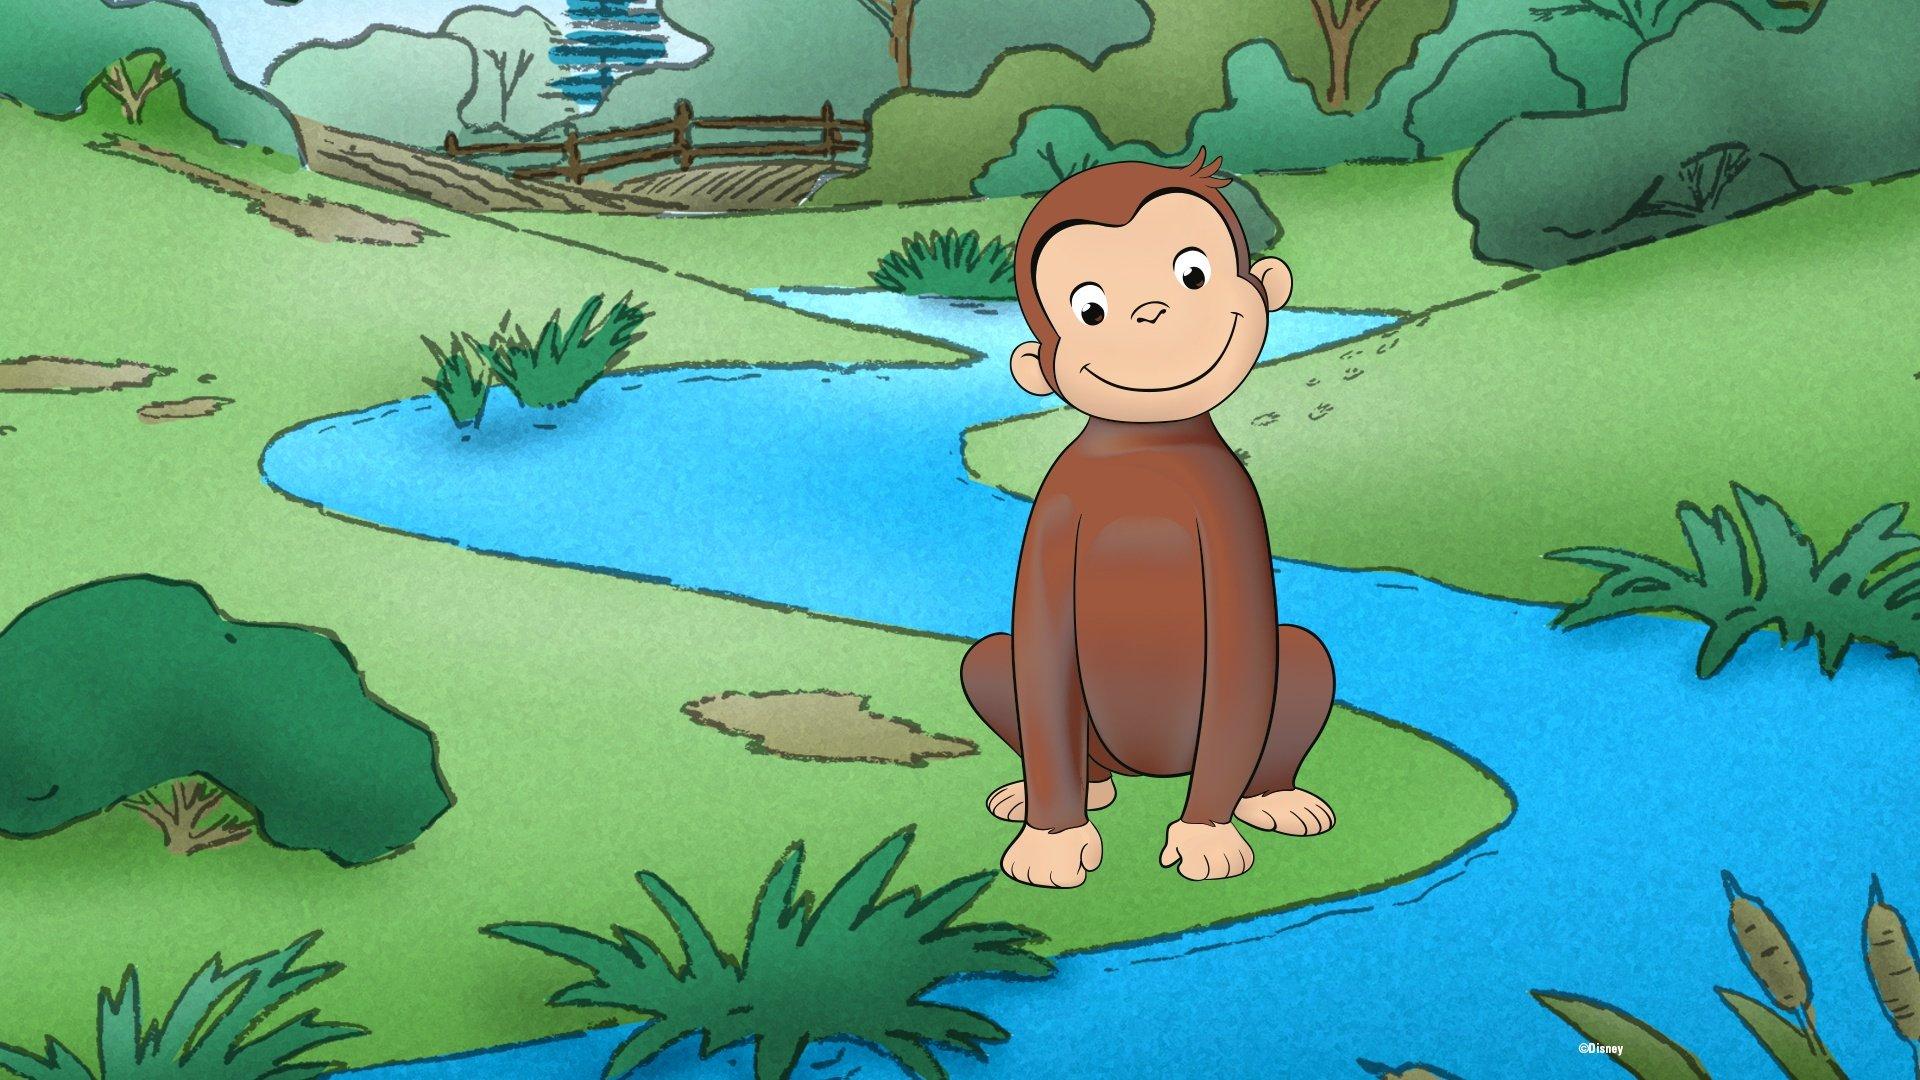 Curioso come George - Stag. 8 Ep. 3